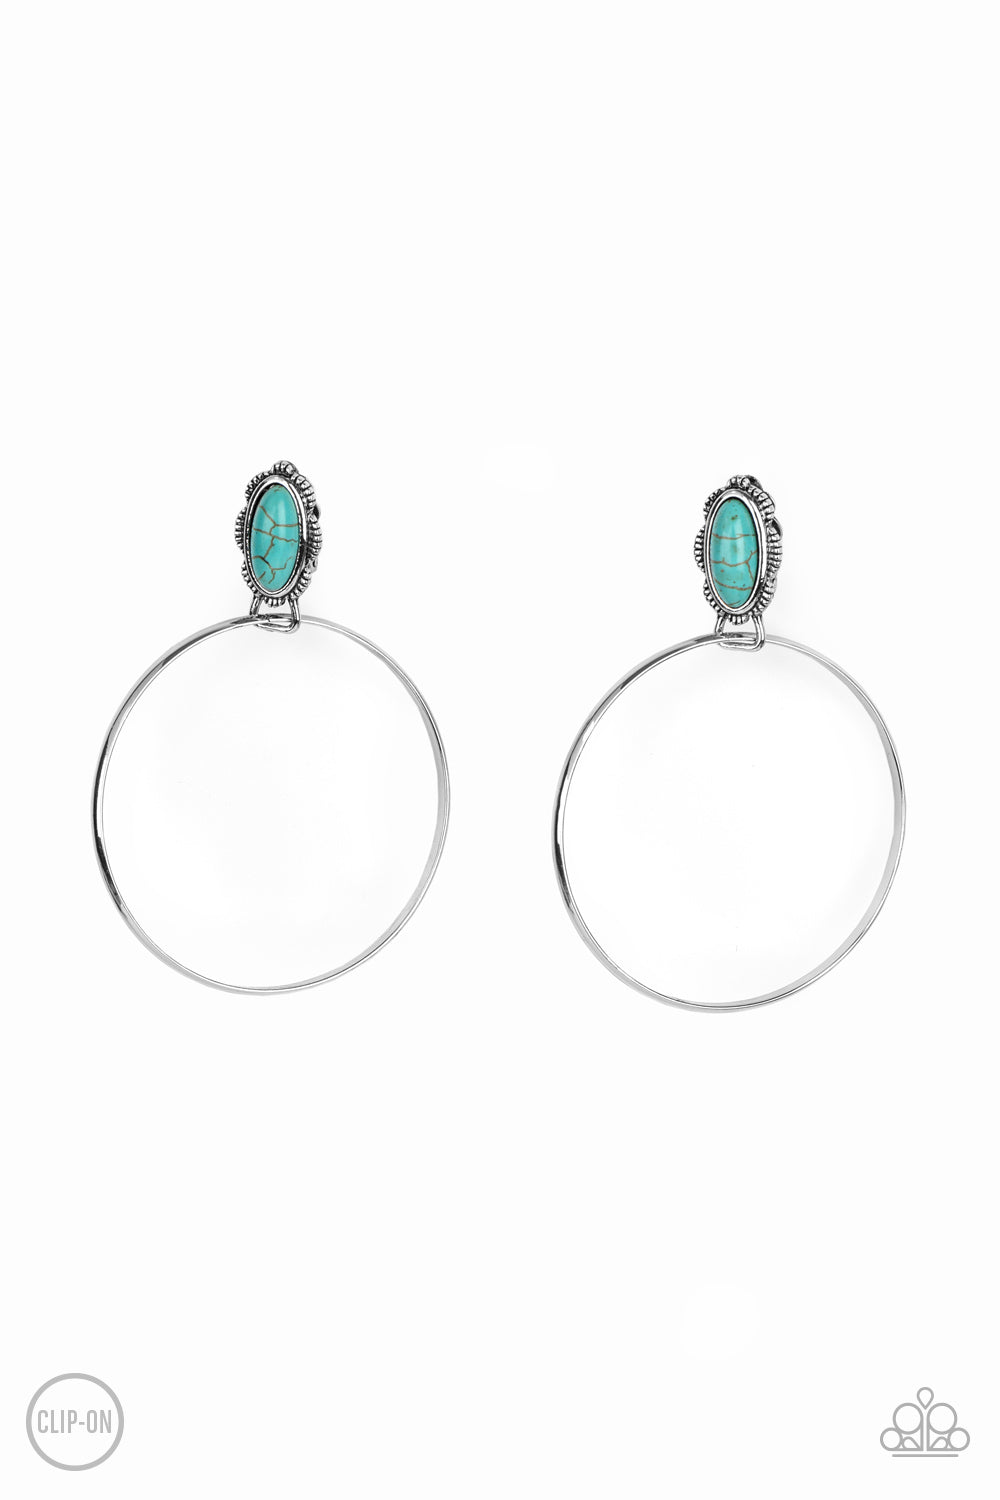 Paparazzi Accessories At Long LASSO - Blue Clip-On Earrings - Lady T Accessories